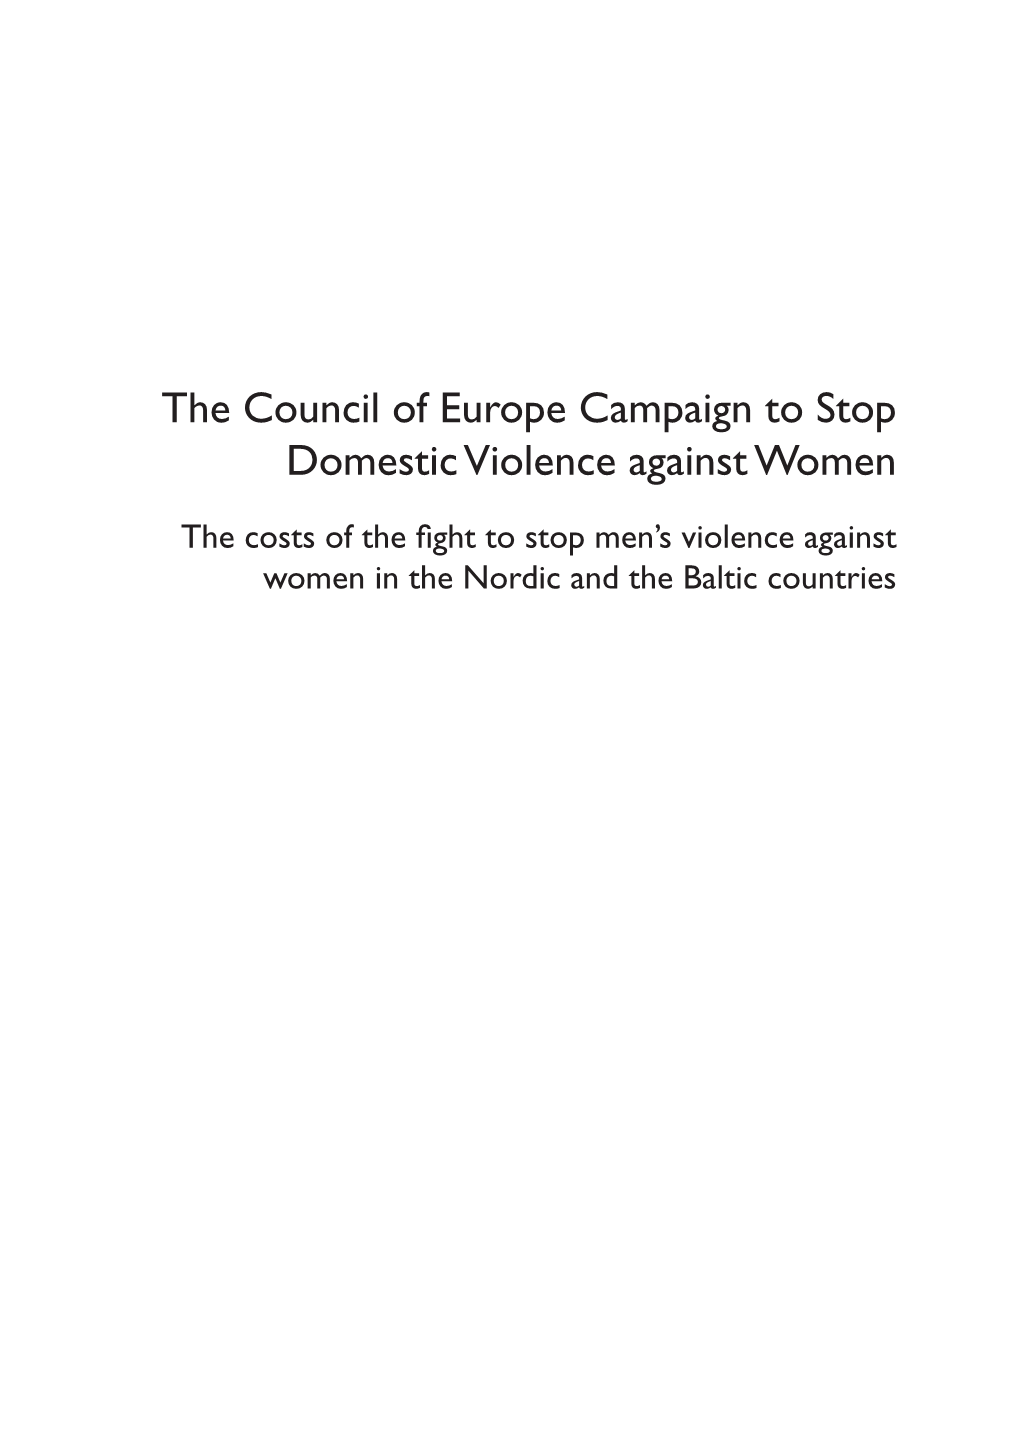 The Council of Europe Campaign to Stop Domestic Violence Against Women